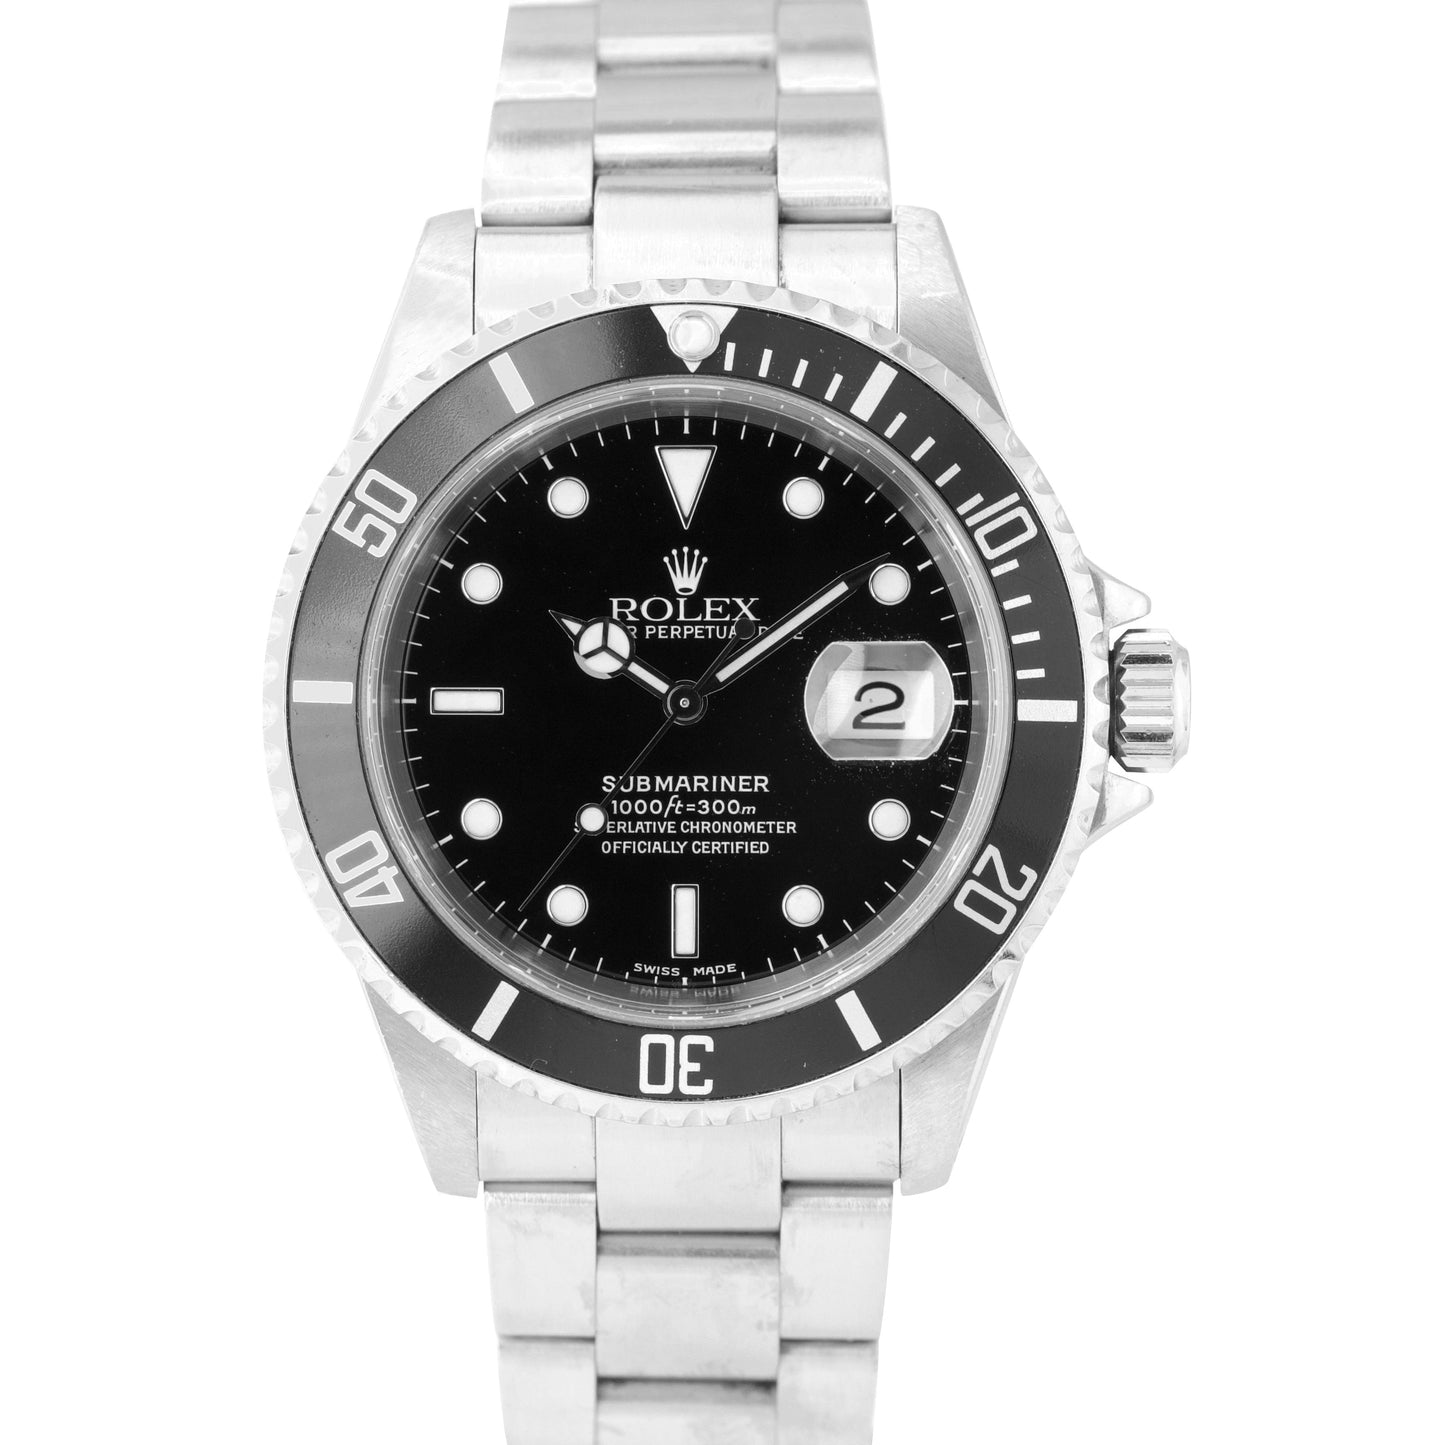 MINT Rolex Submariner Date SEL 40mm Black Stainless Steel Dive Watch 16610